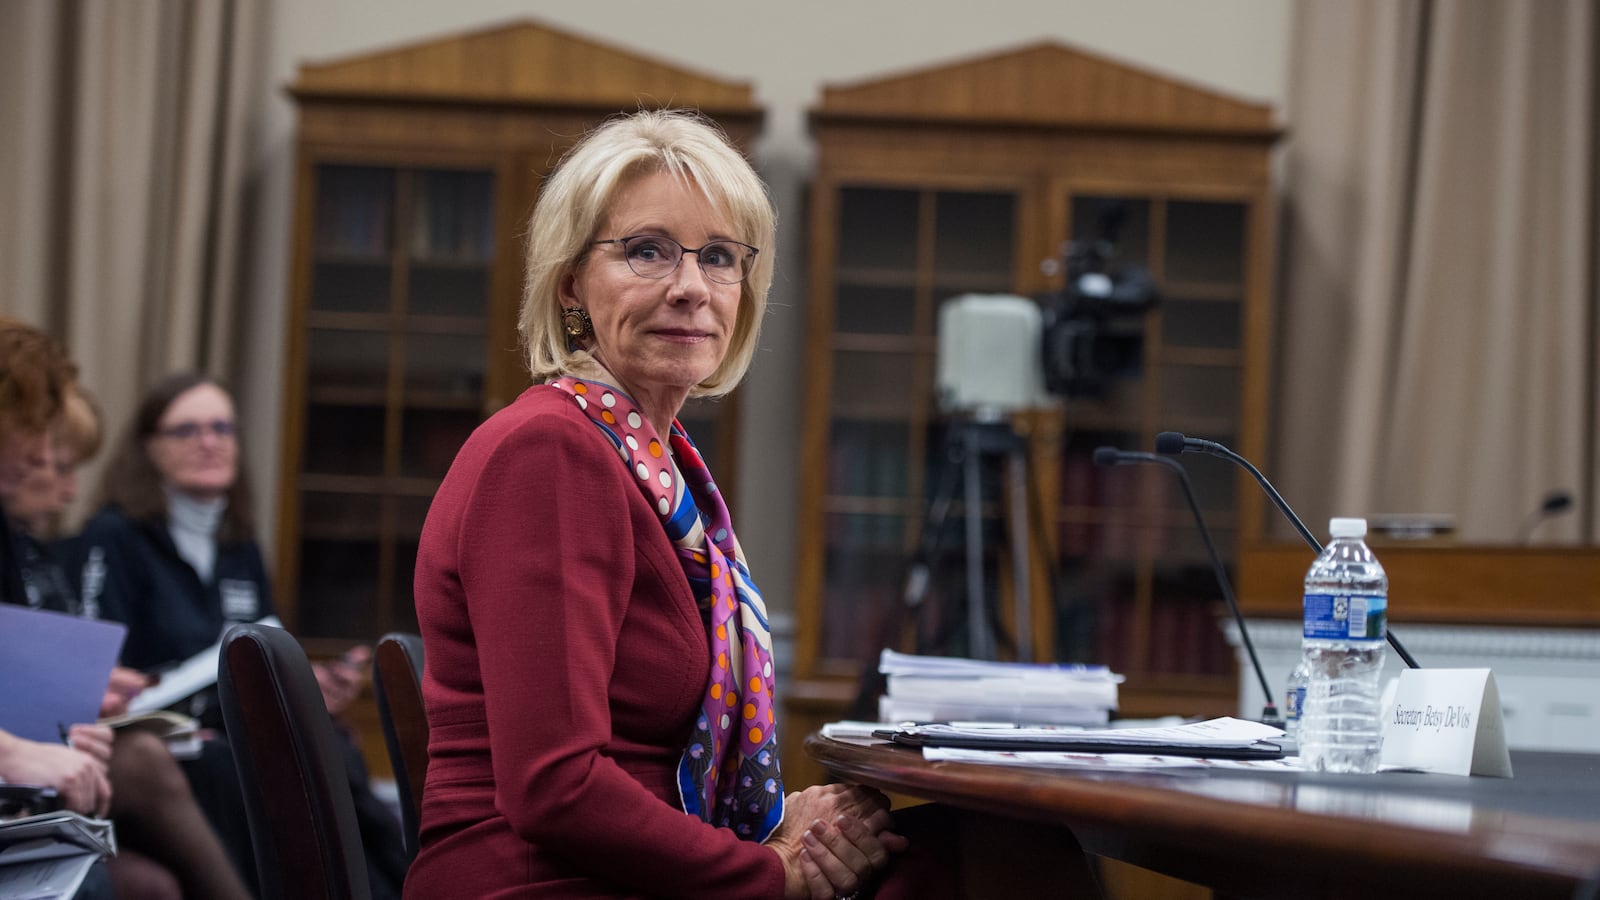 Education Secretary Betsy DeVos prepares to testify at a House Appropriations Labor, Health and Human Services, Education and Related Agencies Subcommittee hearing in Rayburn Building on the department's FY2019 budget on March 20, 2018. (Photo By Tom Williams/CQ Roll Call)